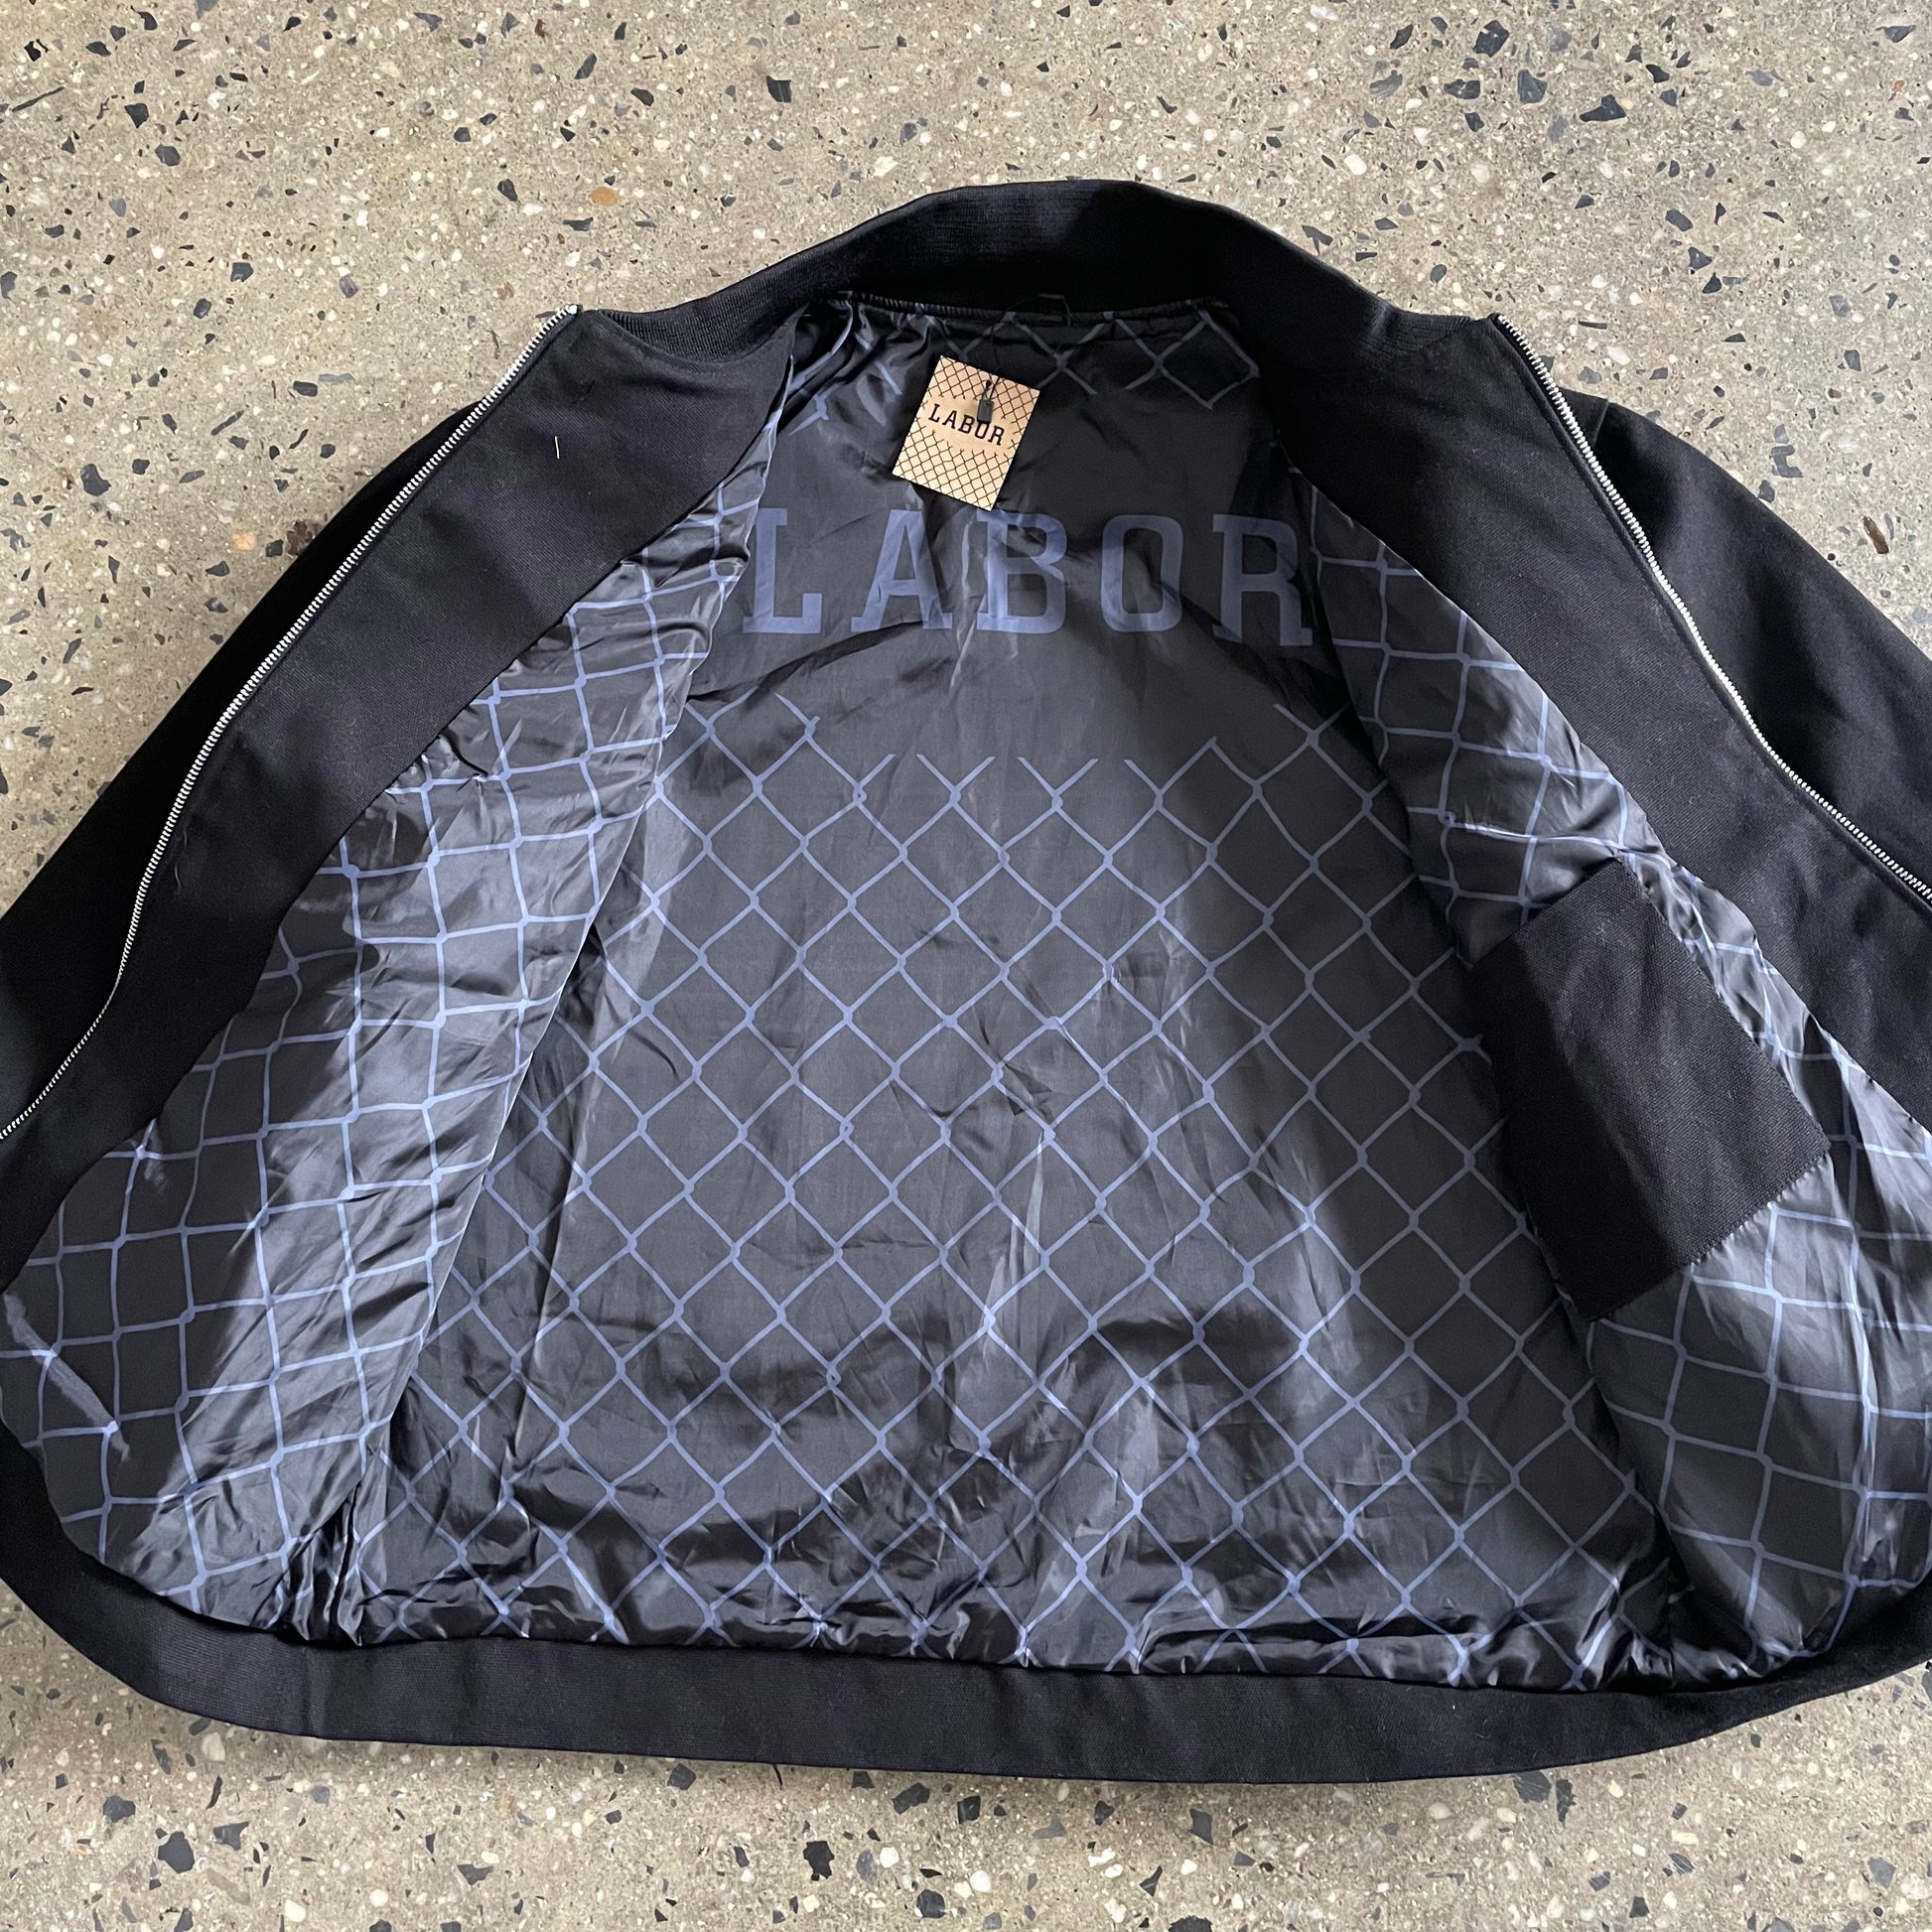 larger view of jacket open, grey fence print on inside of jacket